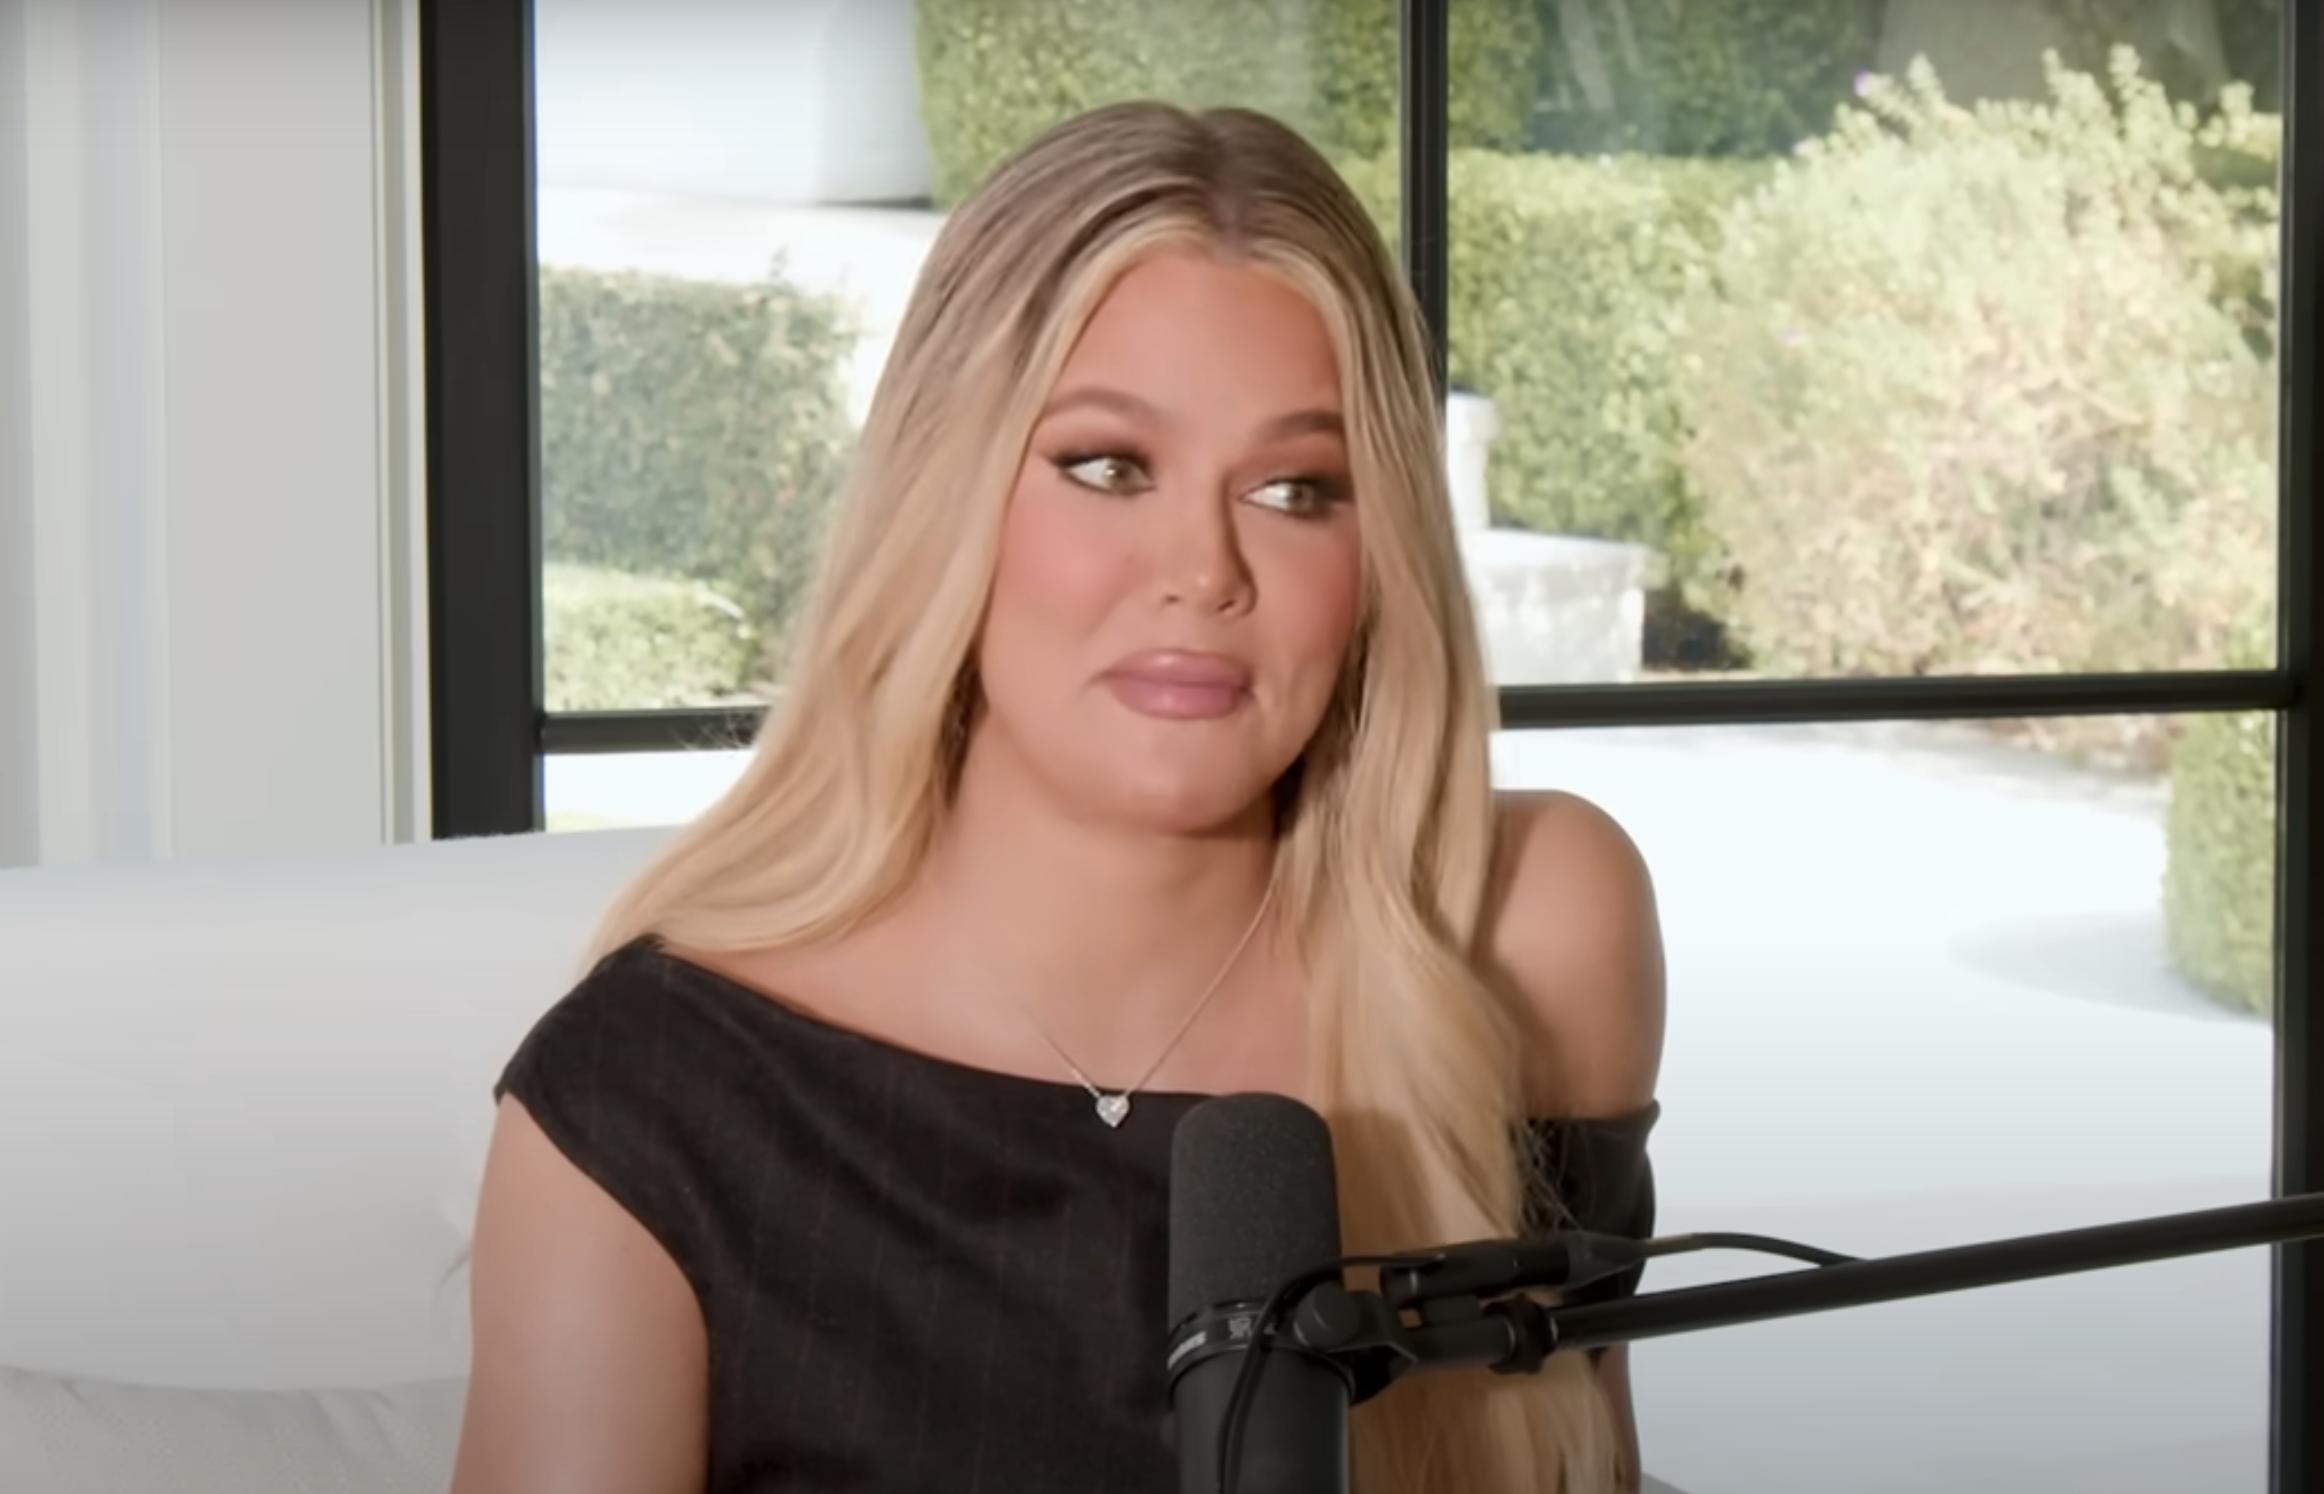 Khloe Kardashian in a black top with long blonde hair speaking into a microphone during an interview